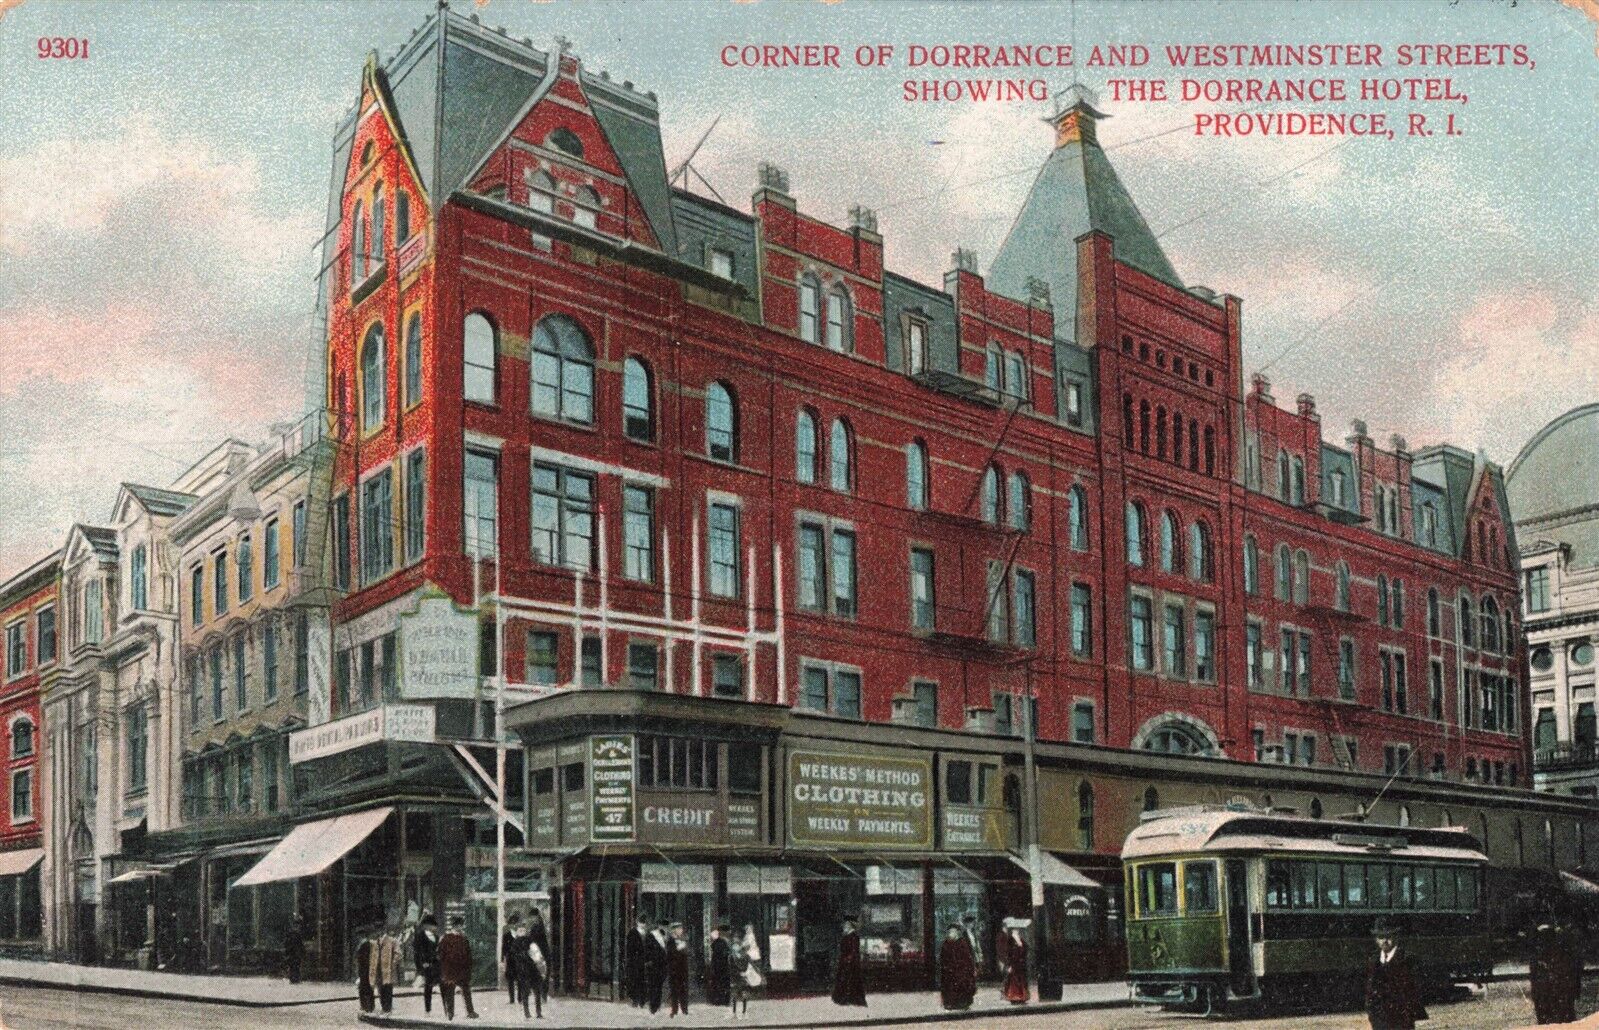 Dorrance Hotel Providence RI Store Fronts Trolley Car c.1908 Postcard A582